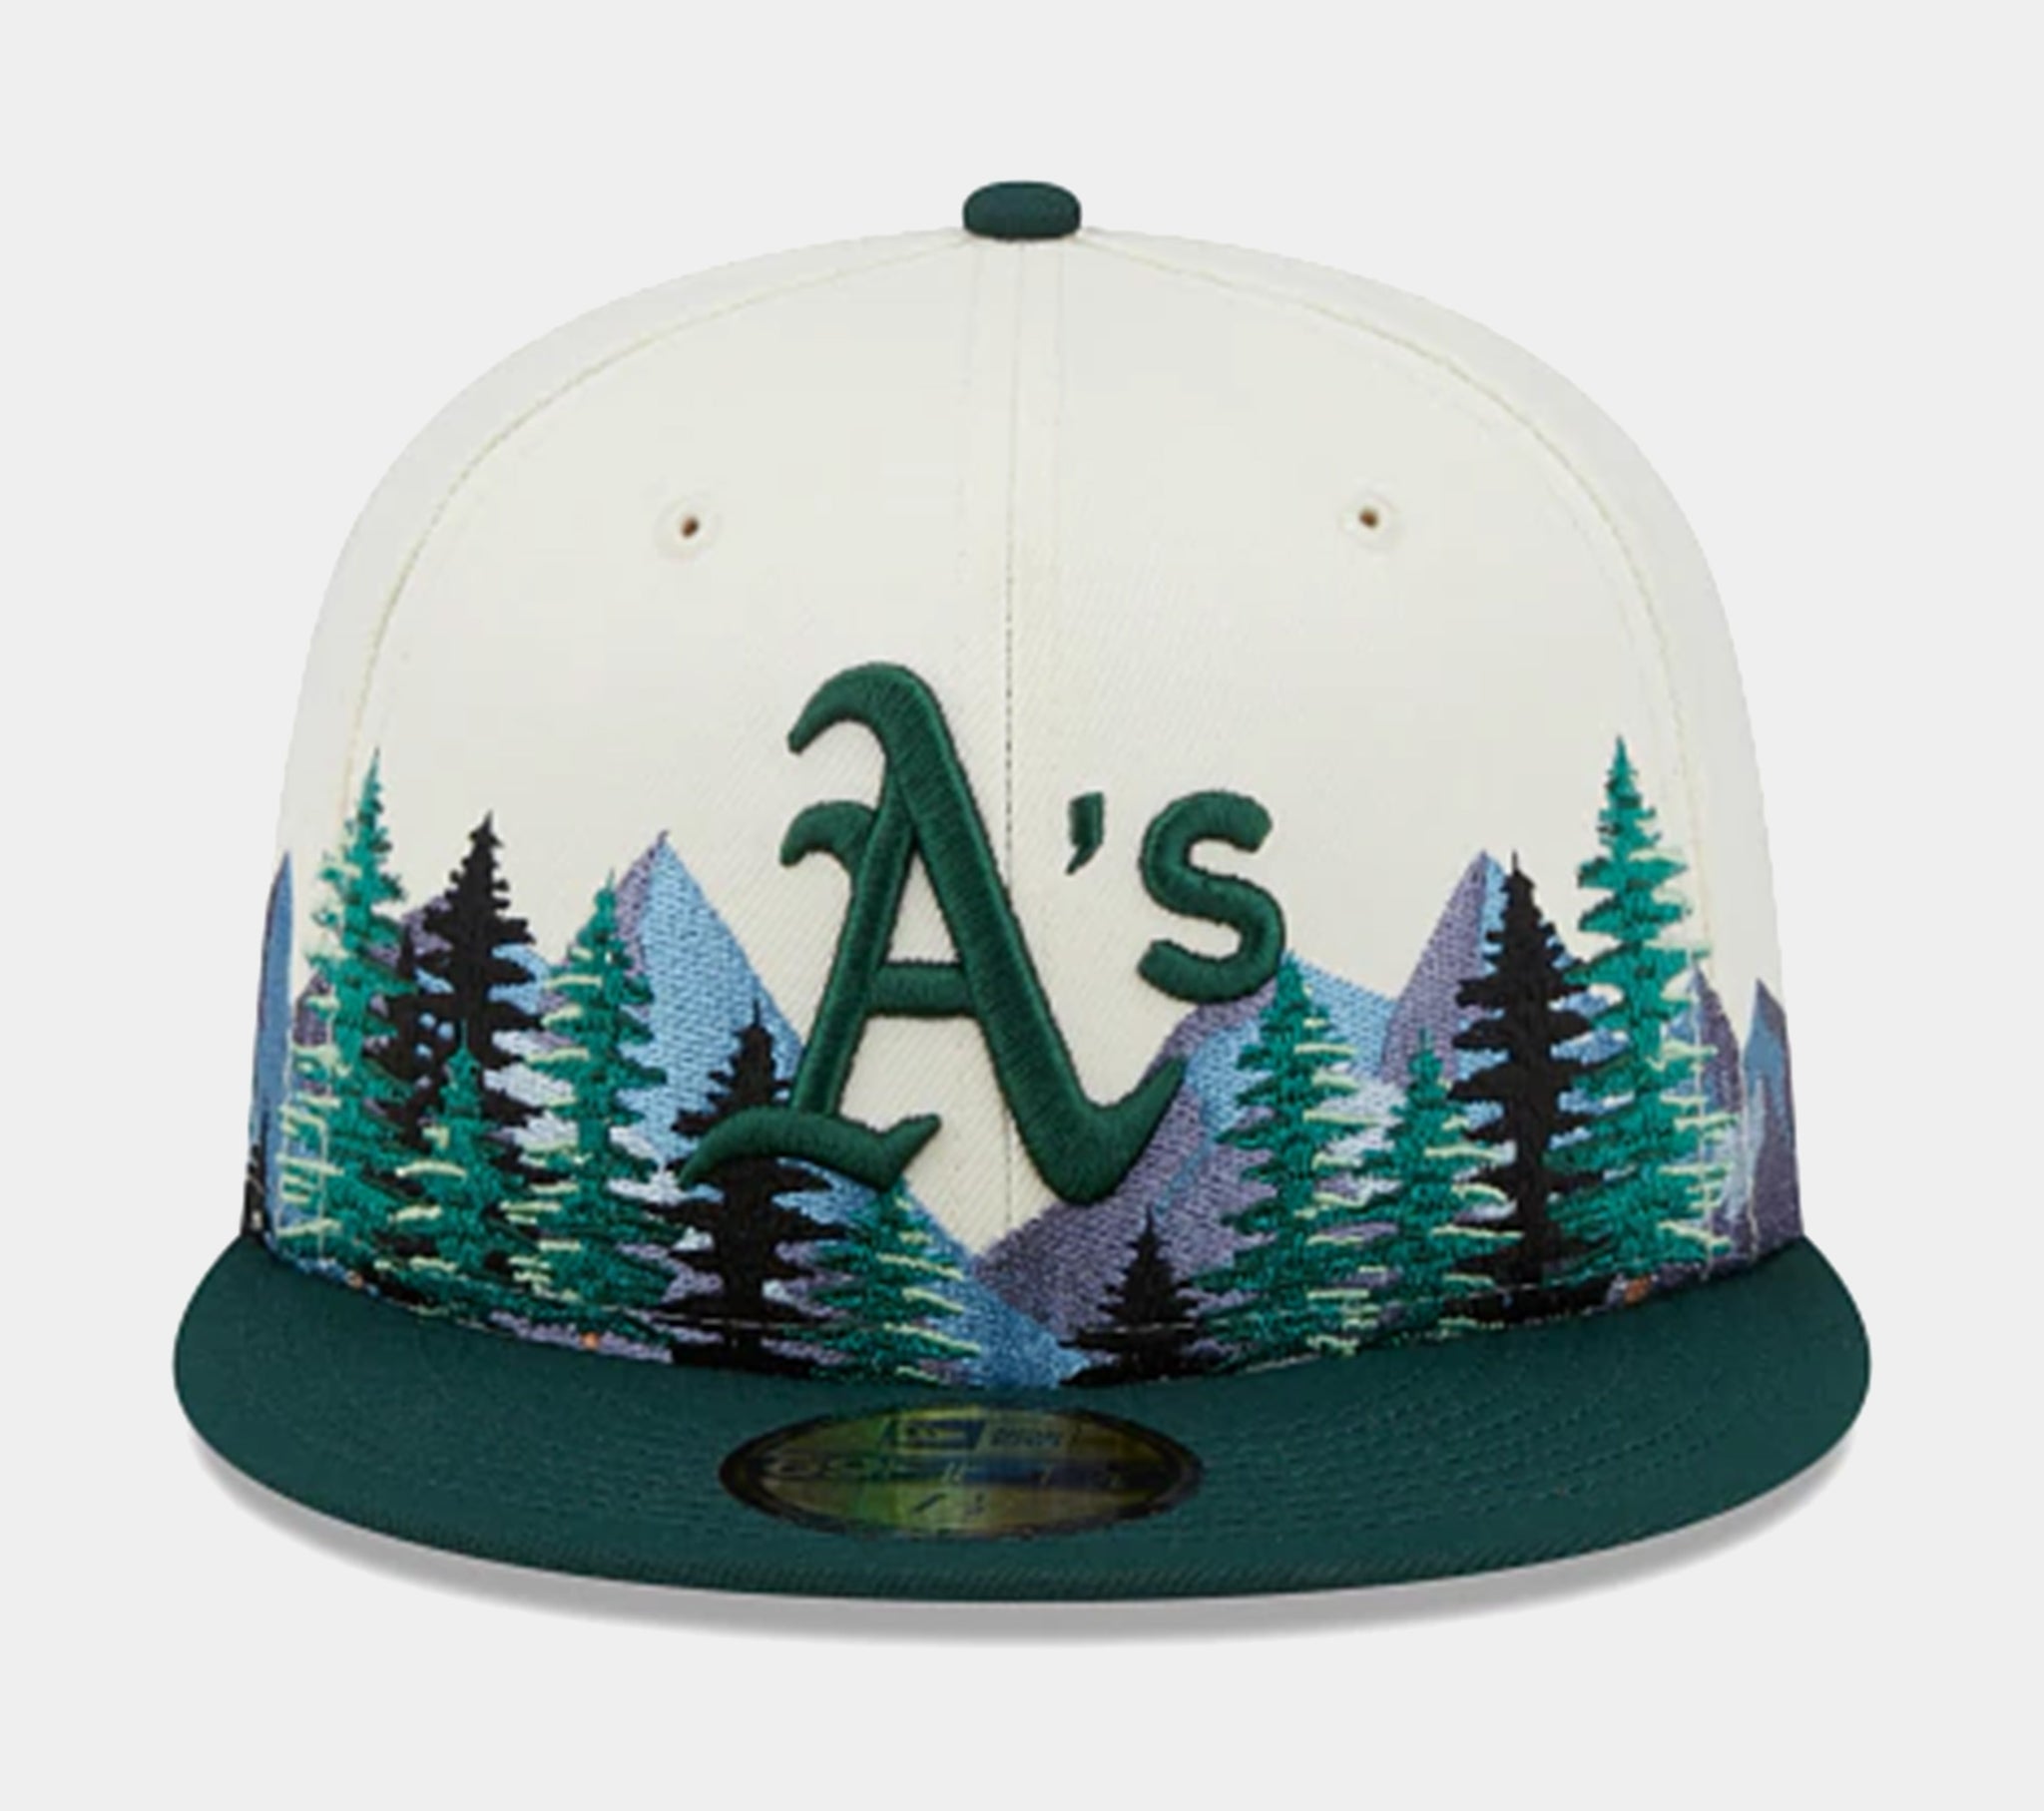 New Era Oakland A's Outdoor 59FIFTY Mens Fitted Hat (White/Green)